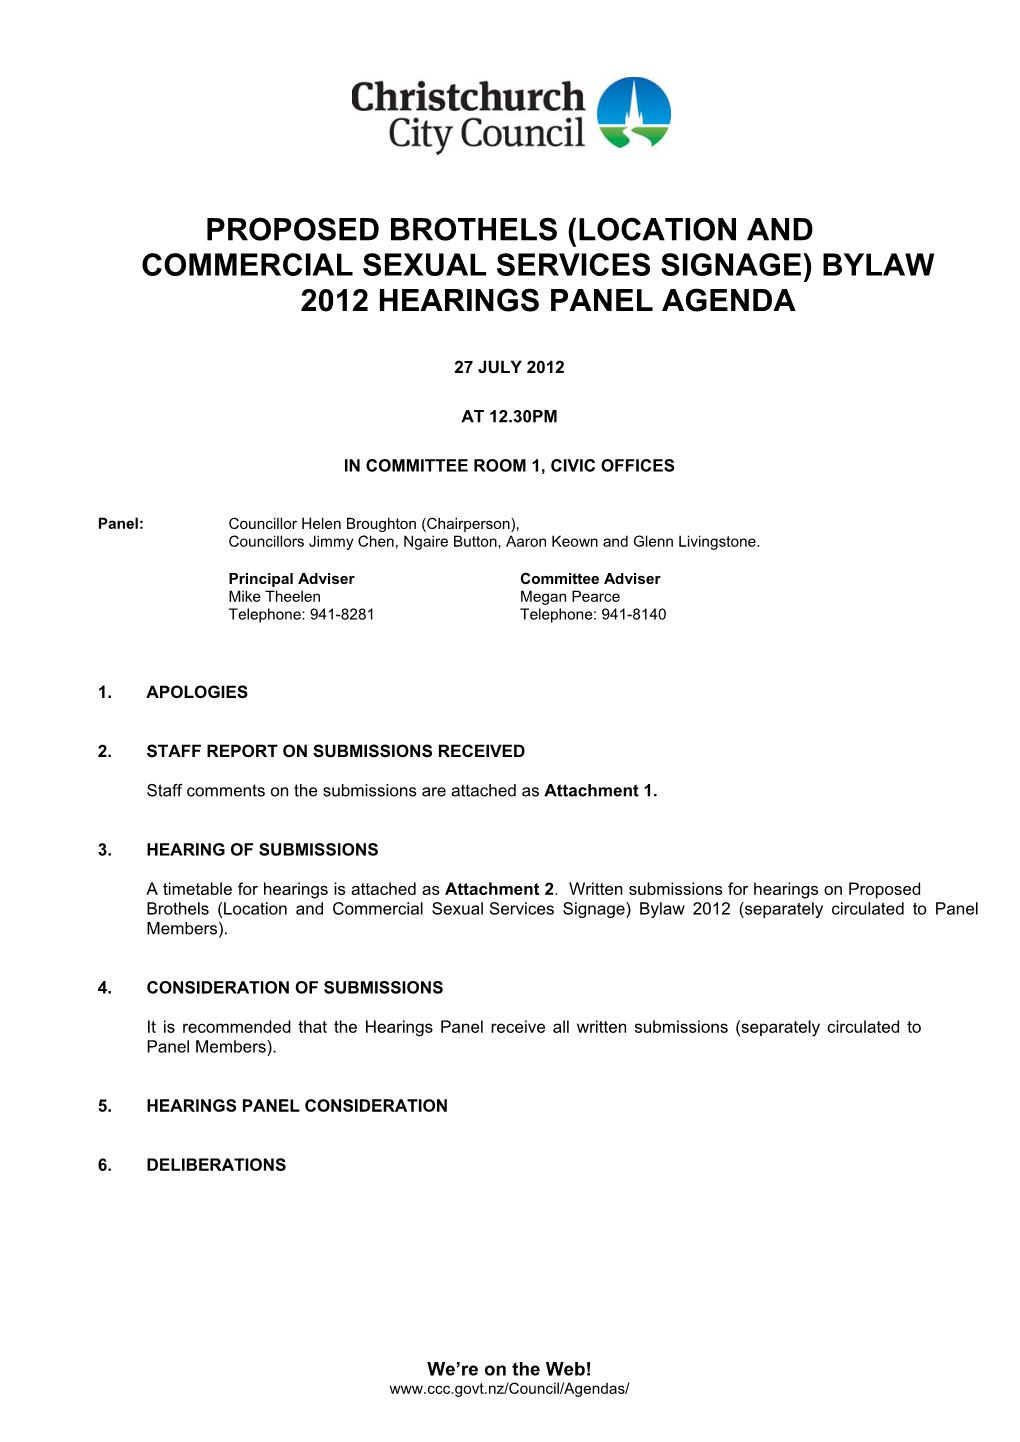 Proposed Brothels (Location and Commercial Sexual Services Signage) Bylaw 2012 Hearings Panel Agenda